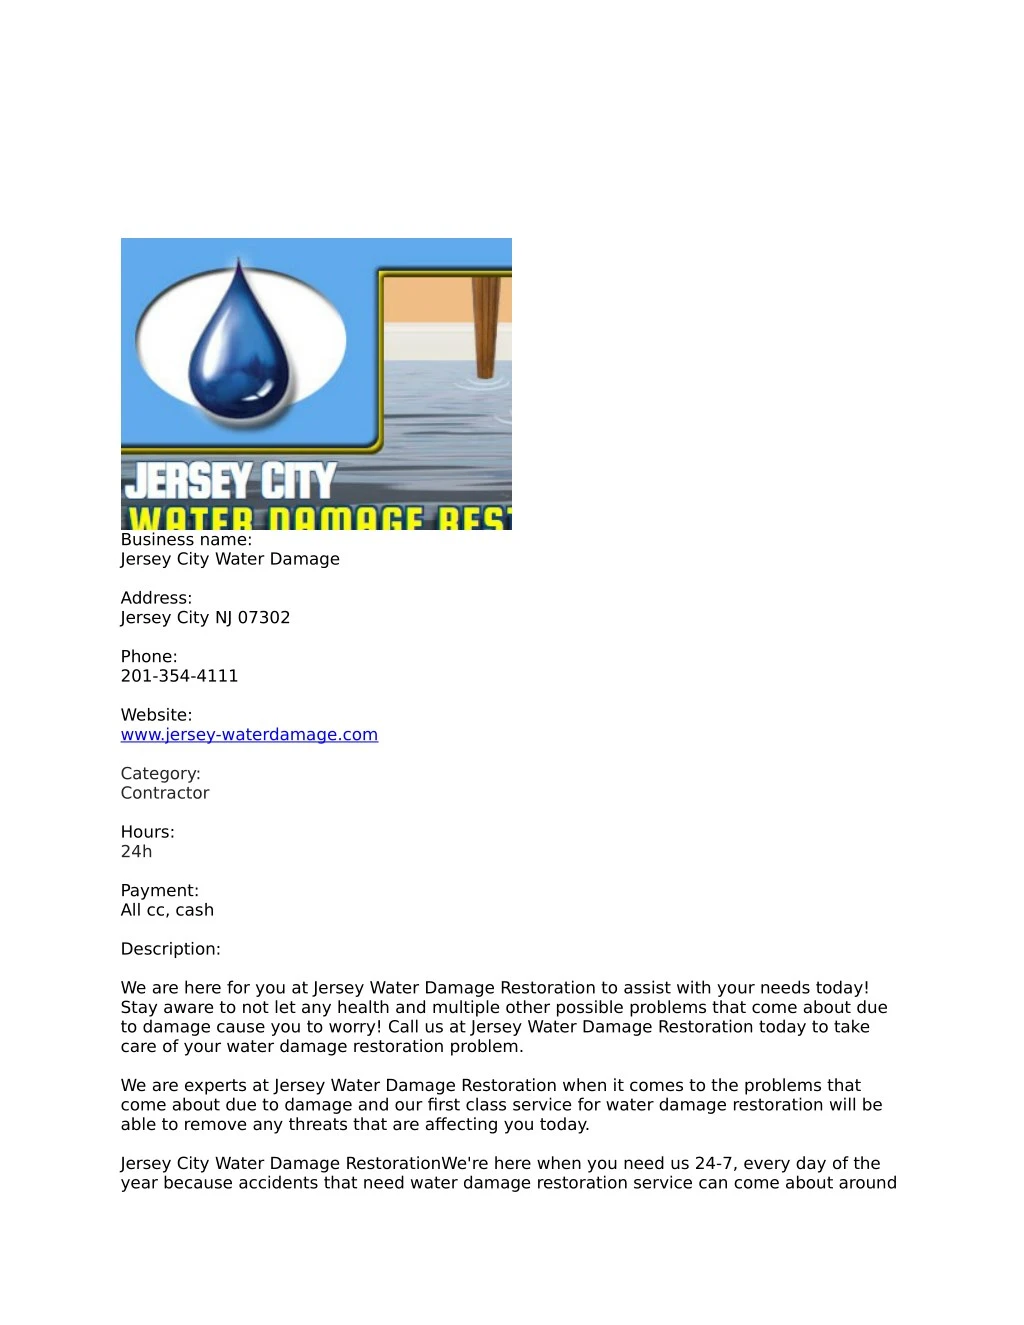 business name jersey city water damage